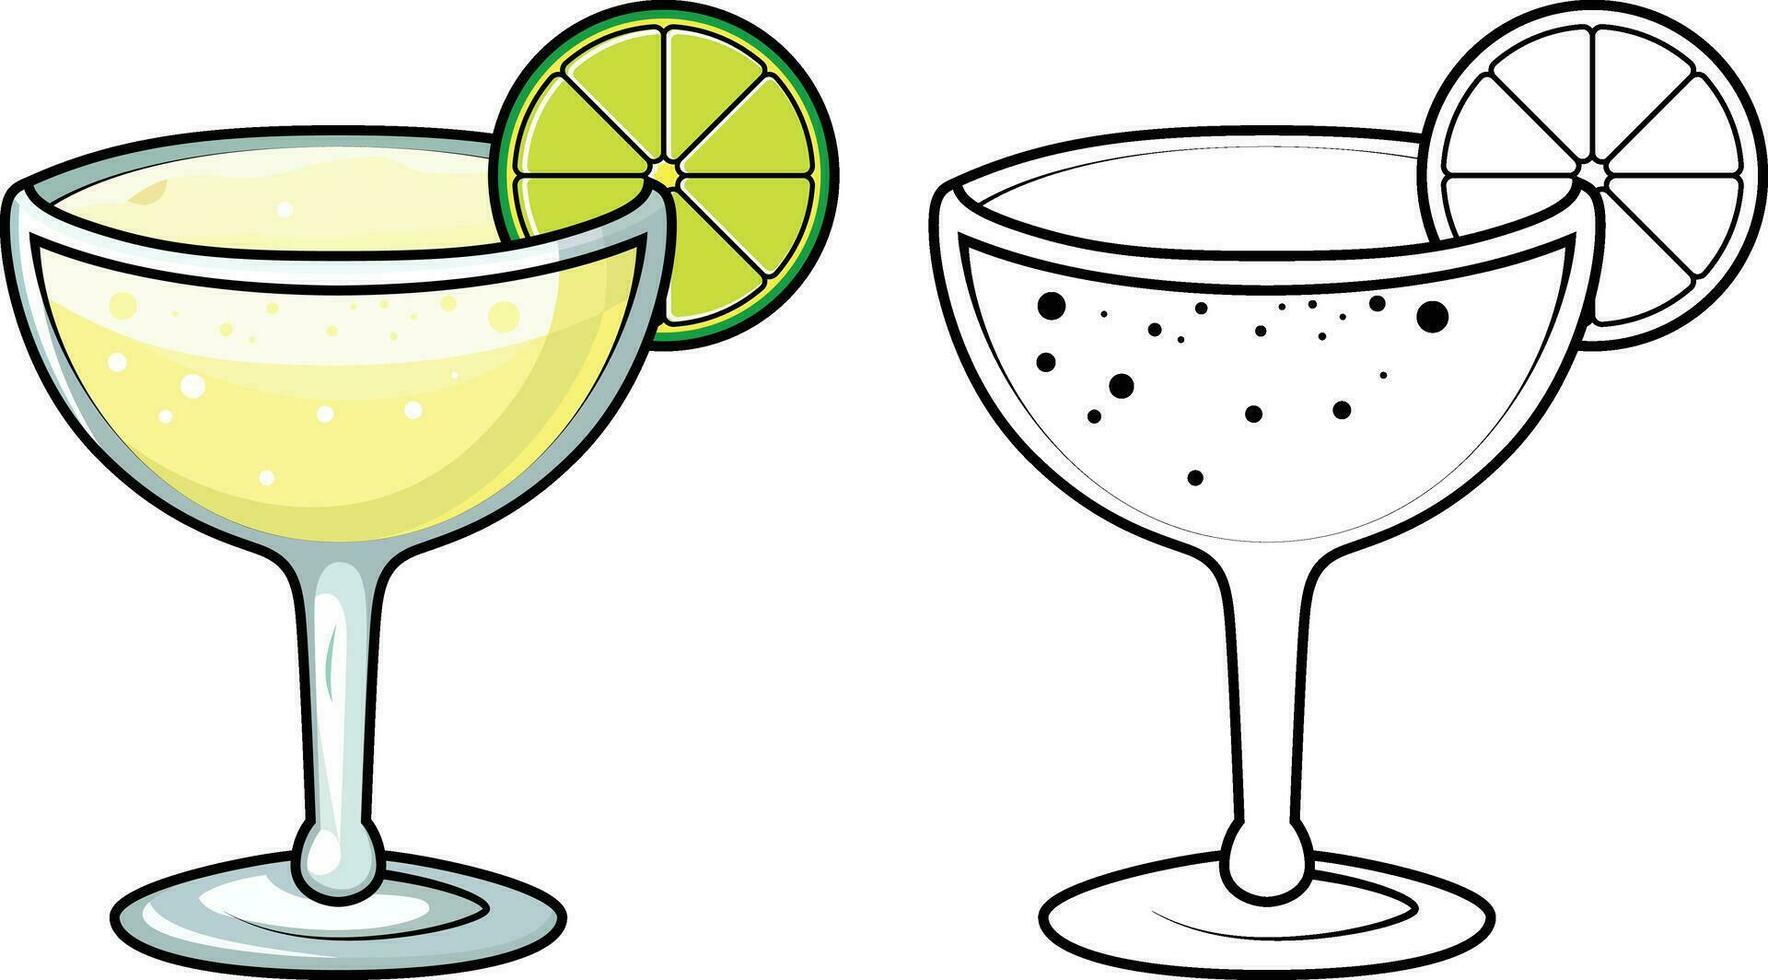 margarita cocktail drink vector illustration, Lime and tequila cocktail stock vector image, colored and black and white line art